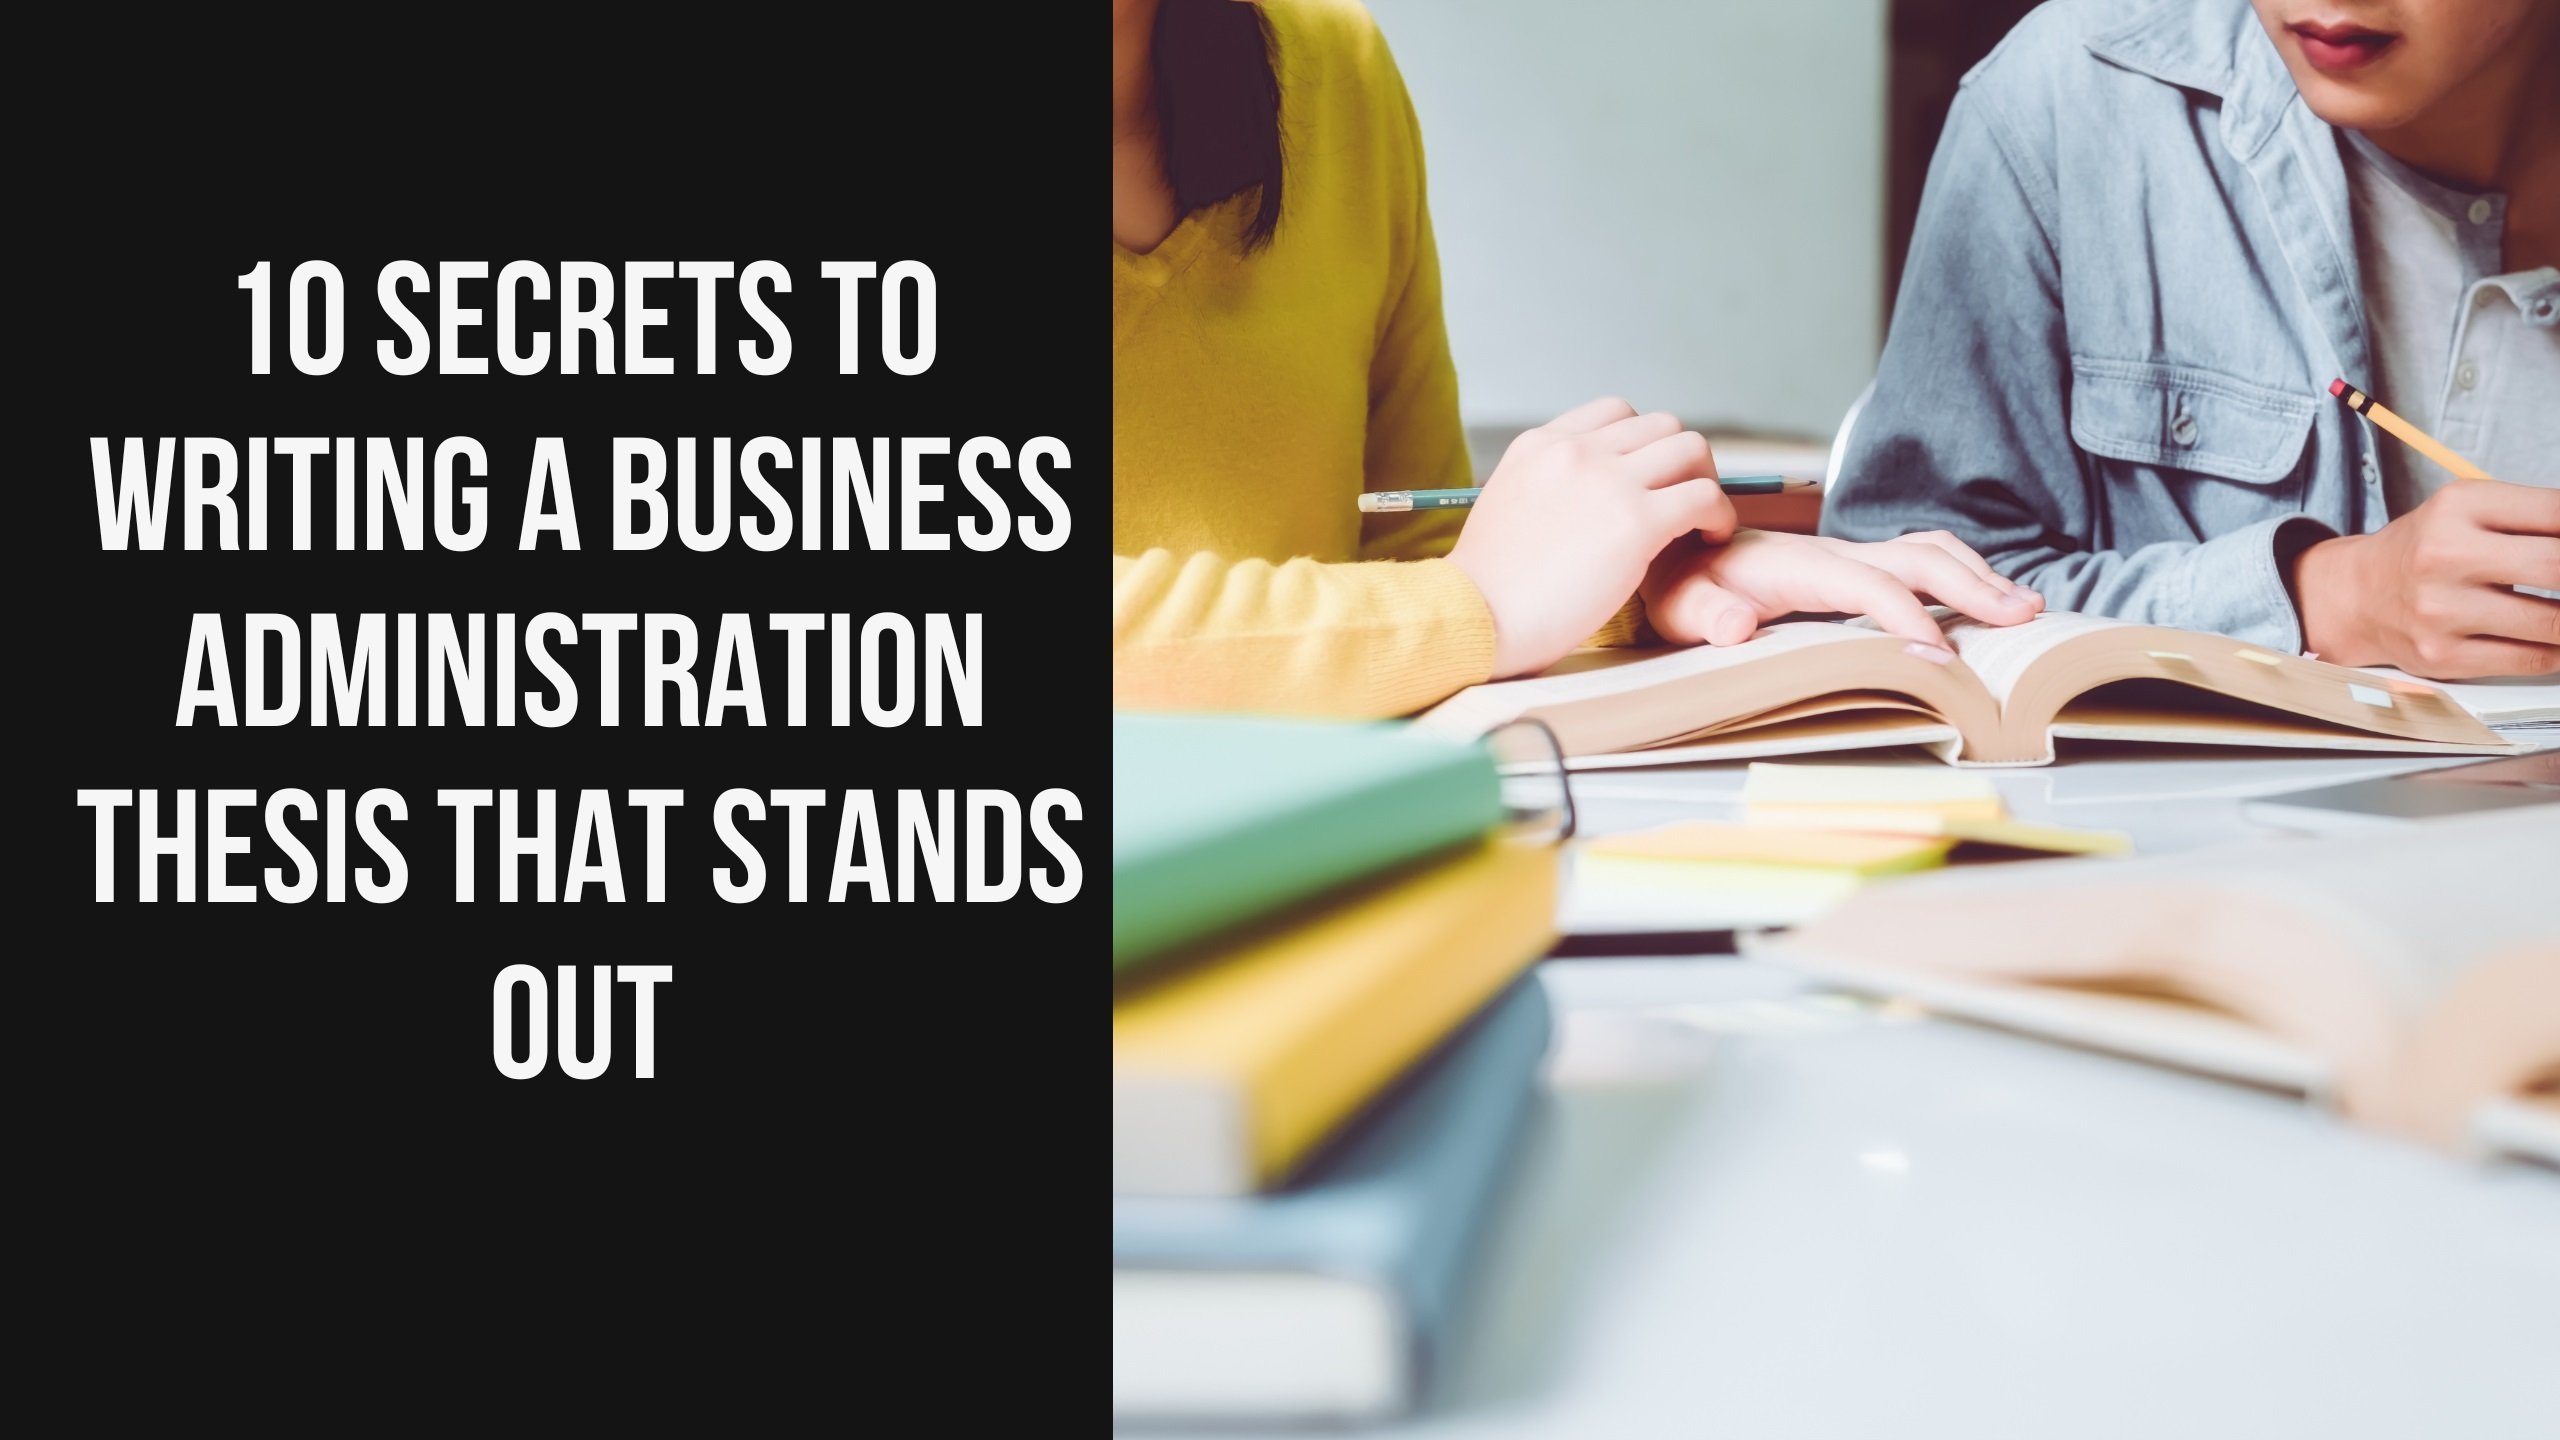 10 Secrets to Writing a Business Administration Thesis That Stands Out